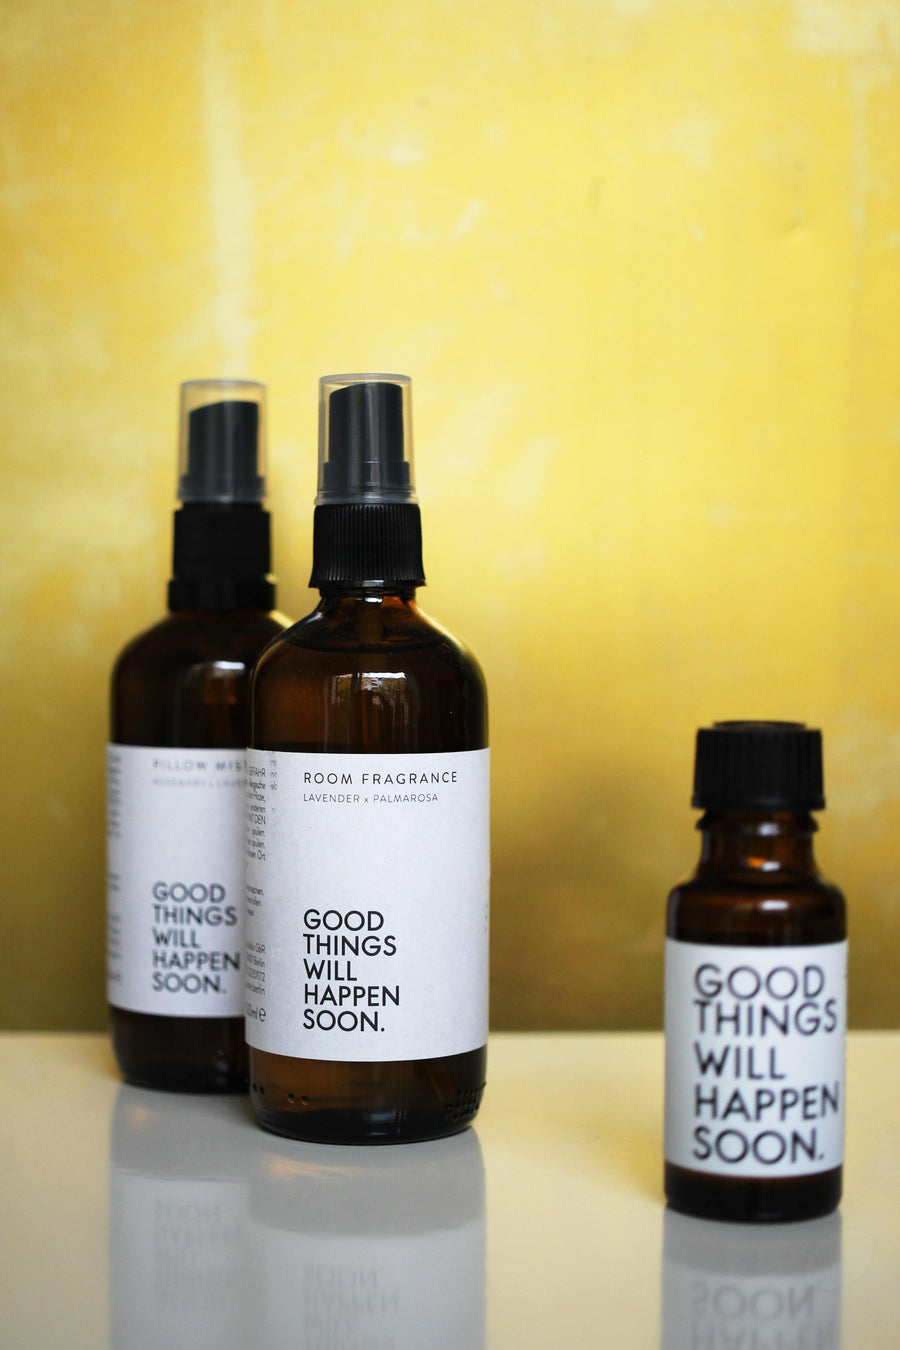 Good Things Will Happen Soon x Coudre Berlin Pillow Mist - The Good Store Berlin